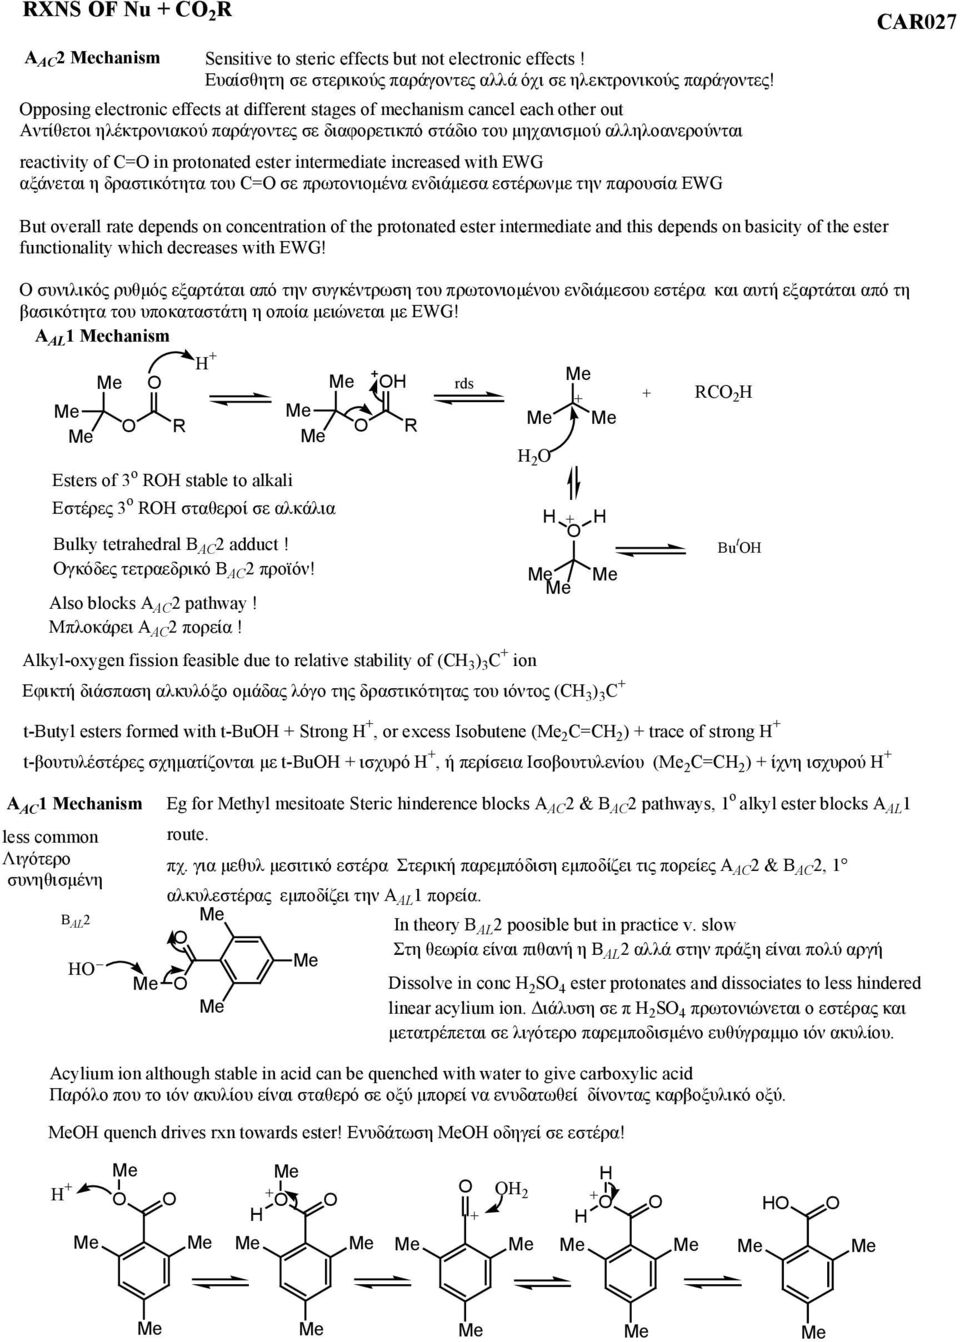 protonated ester intermediate increased with EWG αξάνεται η δραστικότητα του C= σε πρωτονιοµένα ενδιάµεσα εστέρωνµε την παρουσία EWG CA027 But overall rate depends on concentration of the protonated